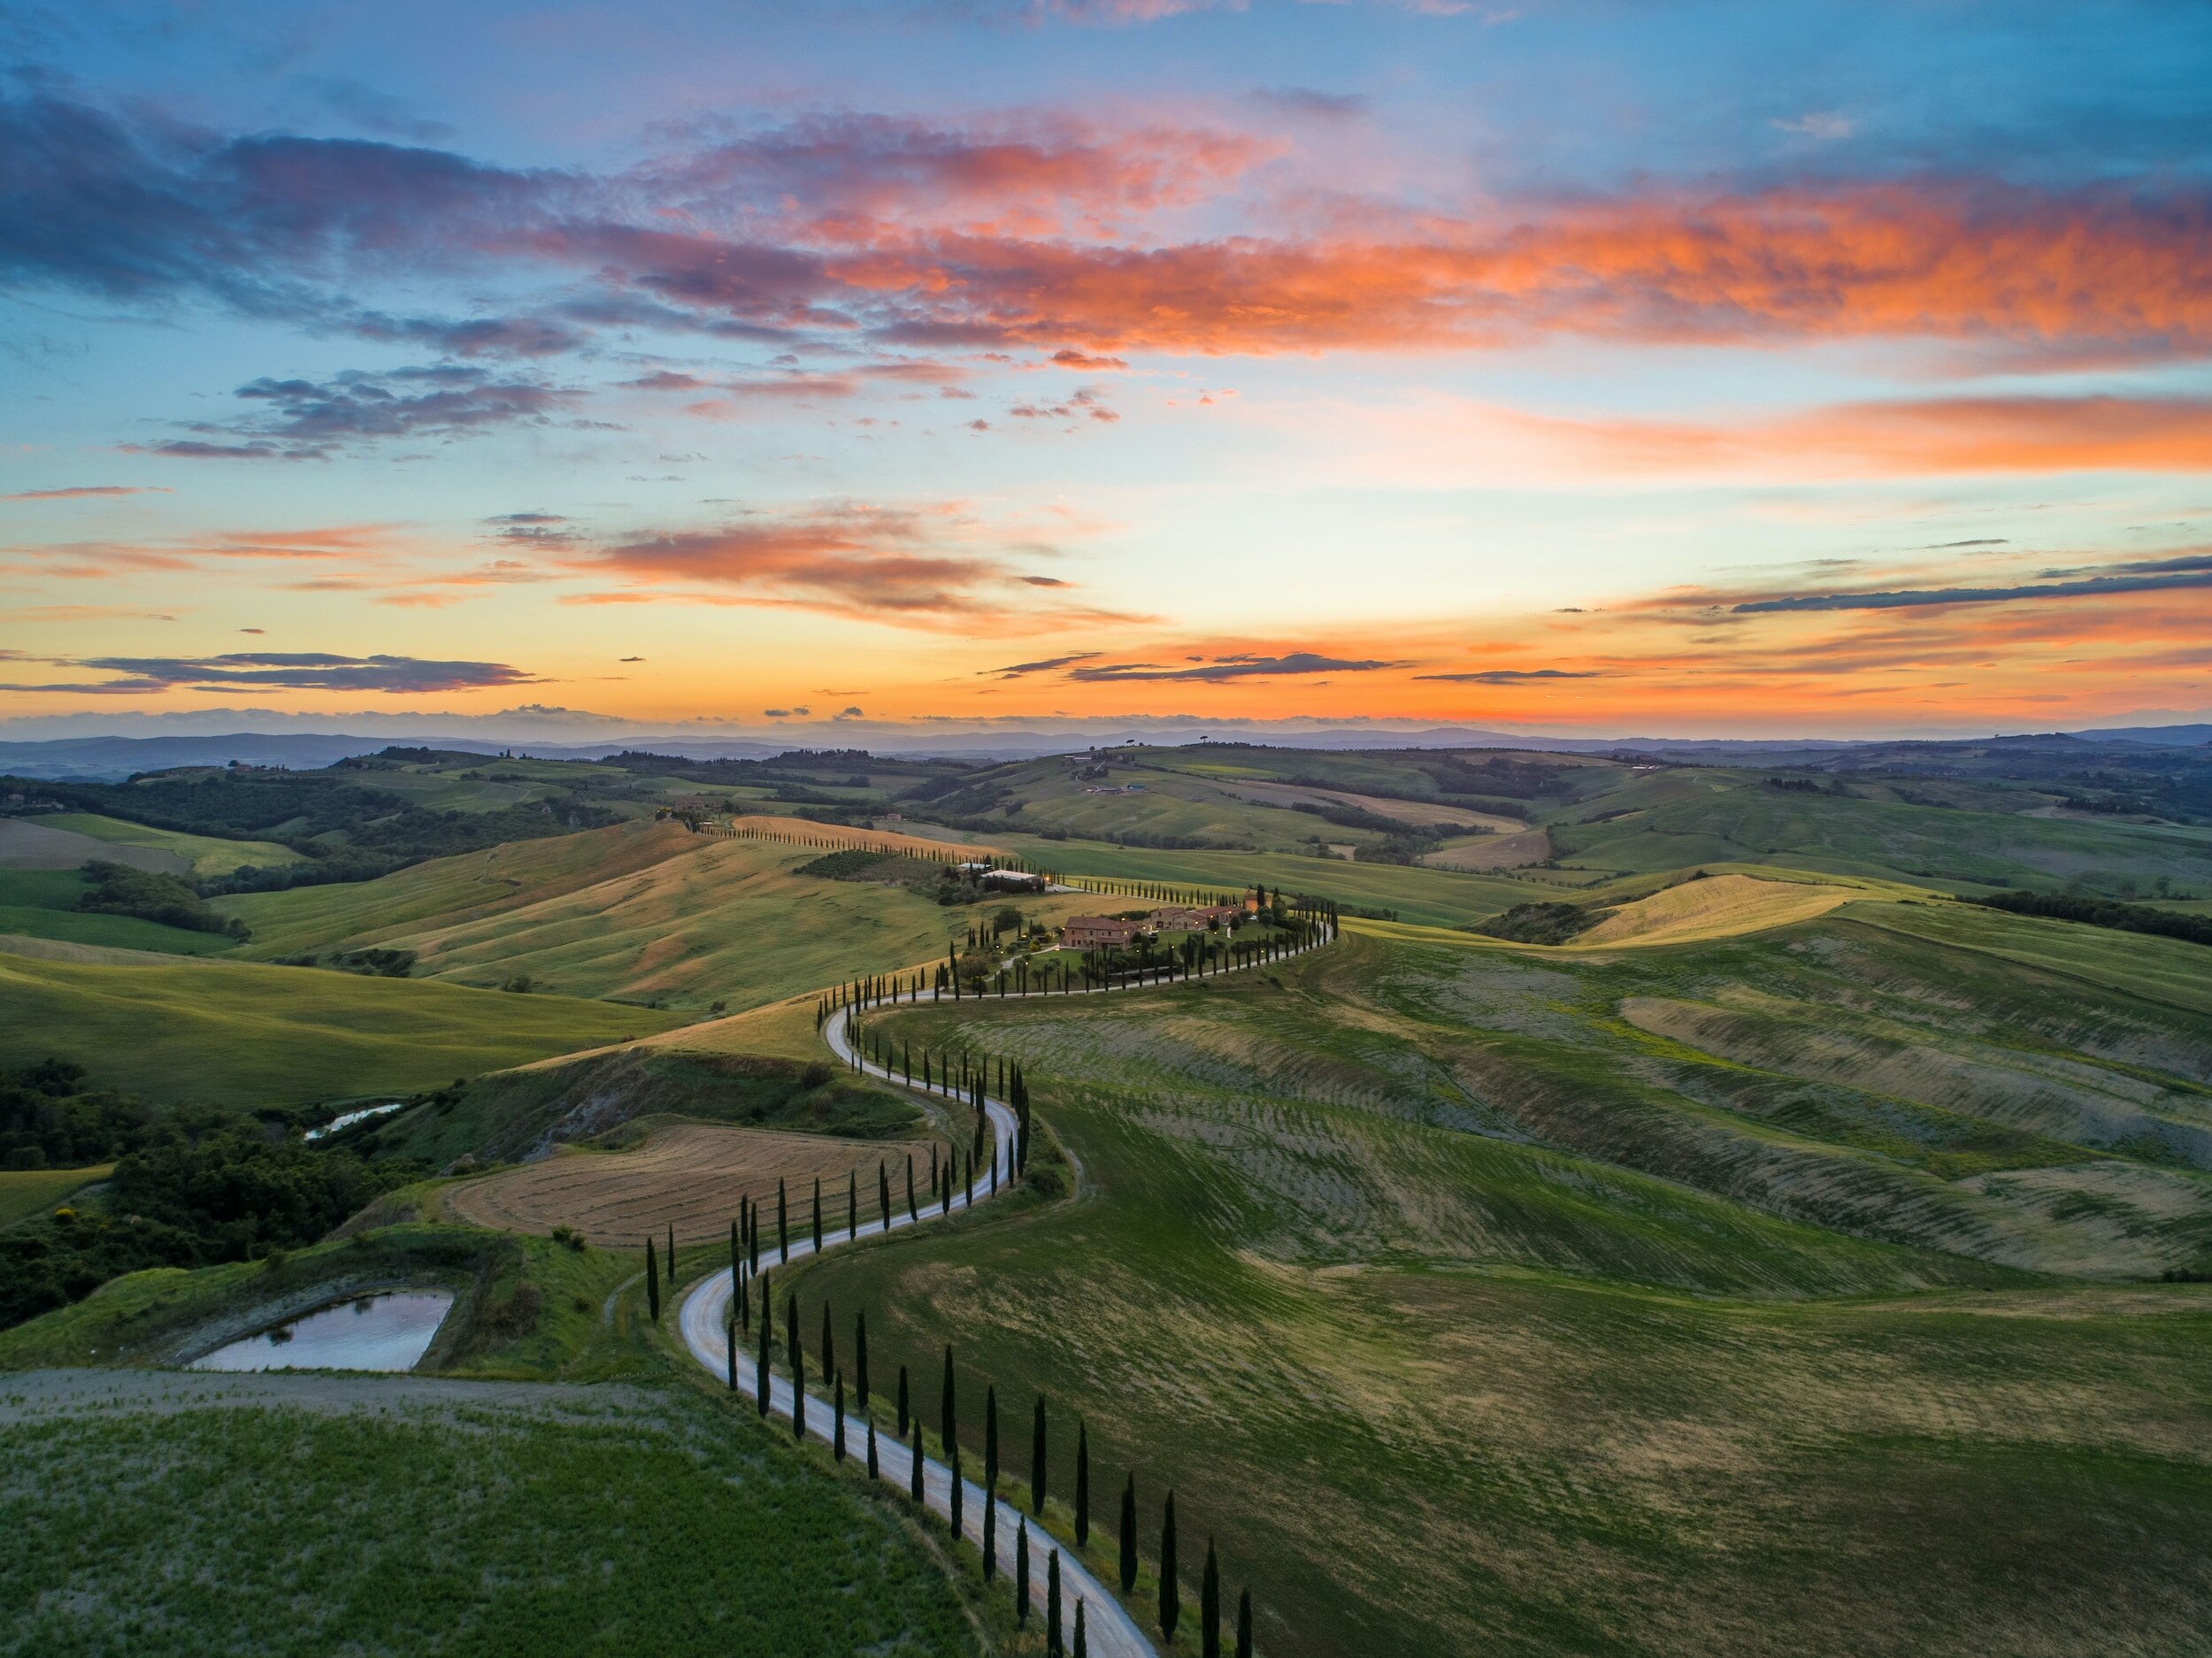 An aerial view over a winding dirt road in the countryside of Tuscany, with gently sloping green hills all around, and a magnificent sunset